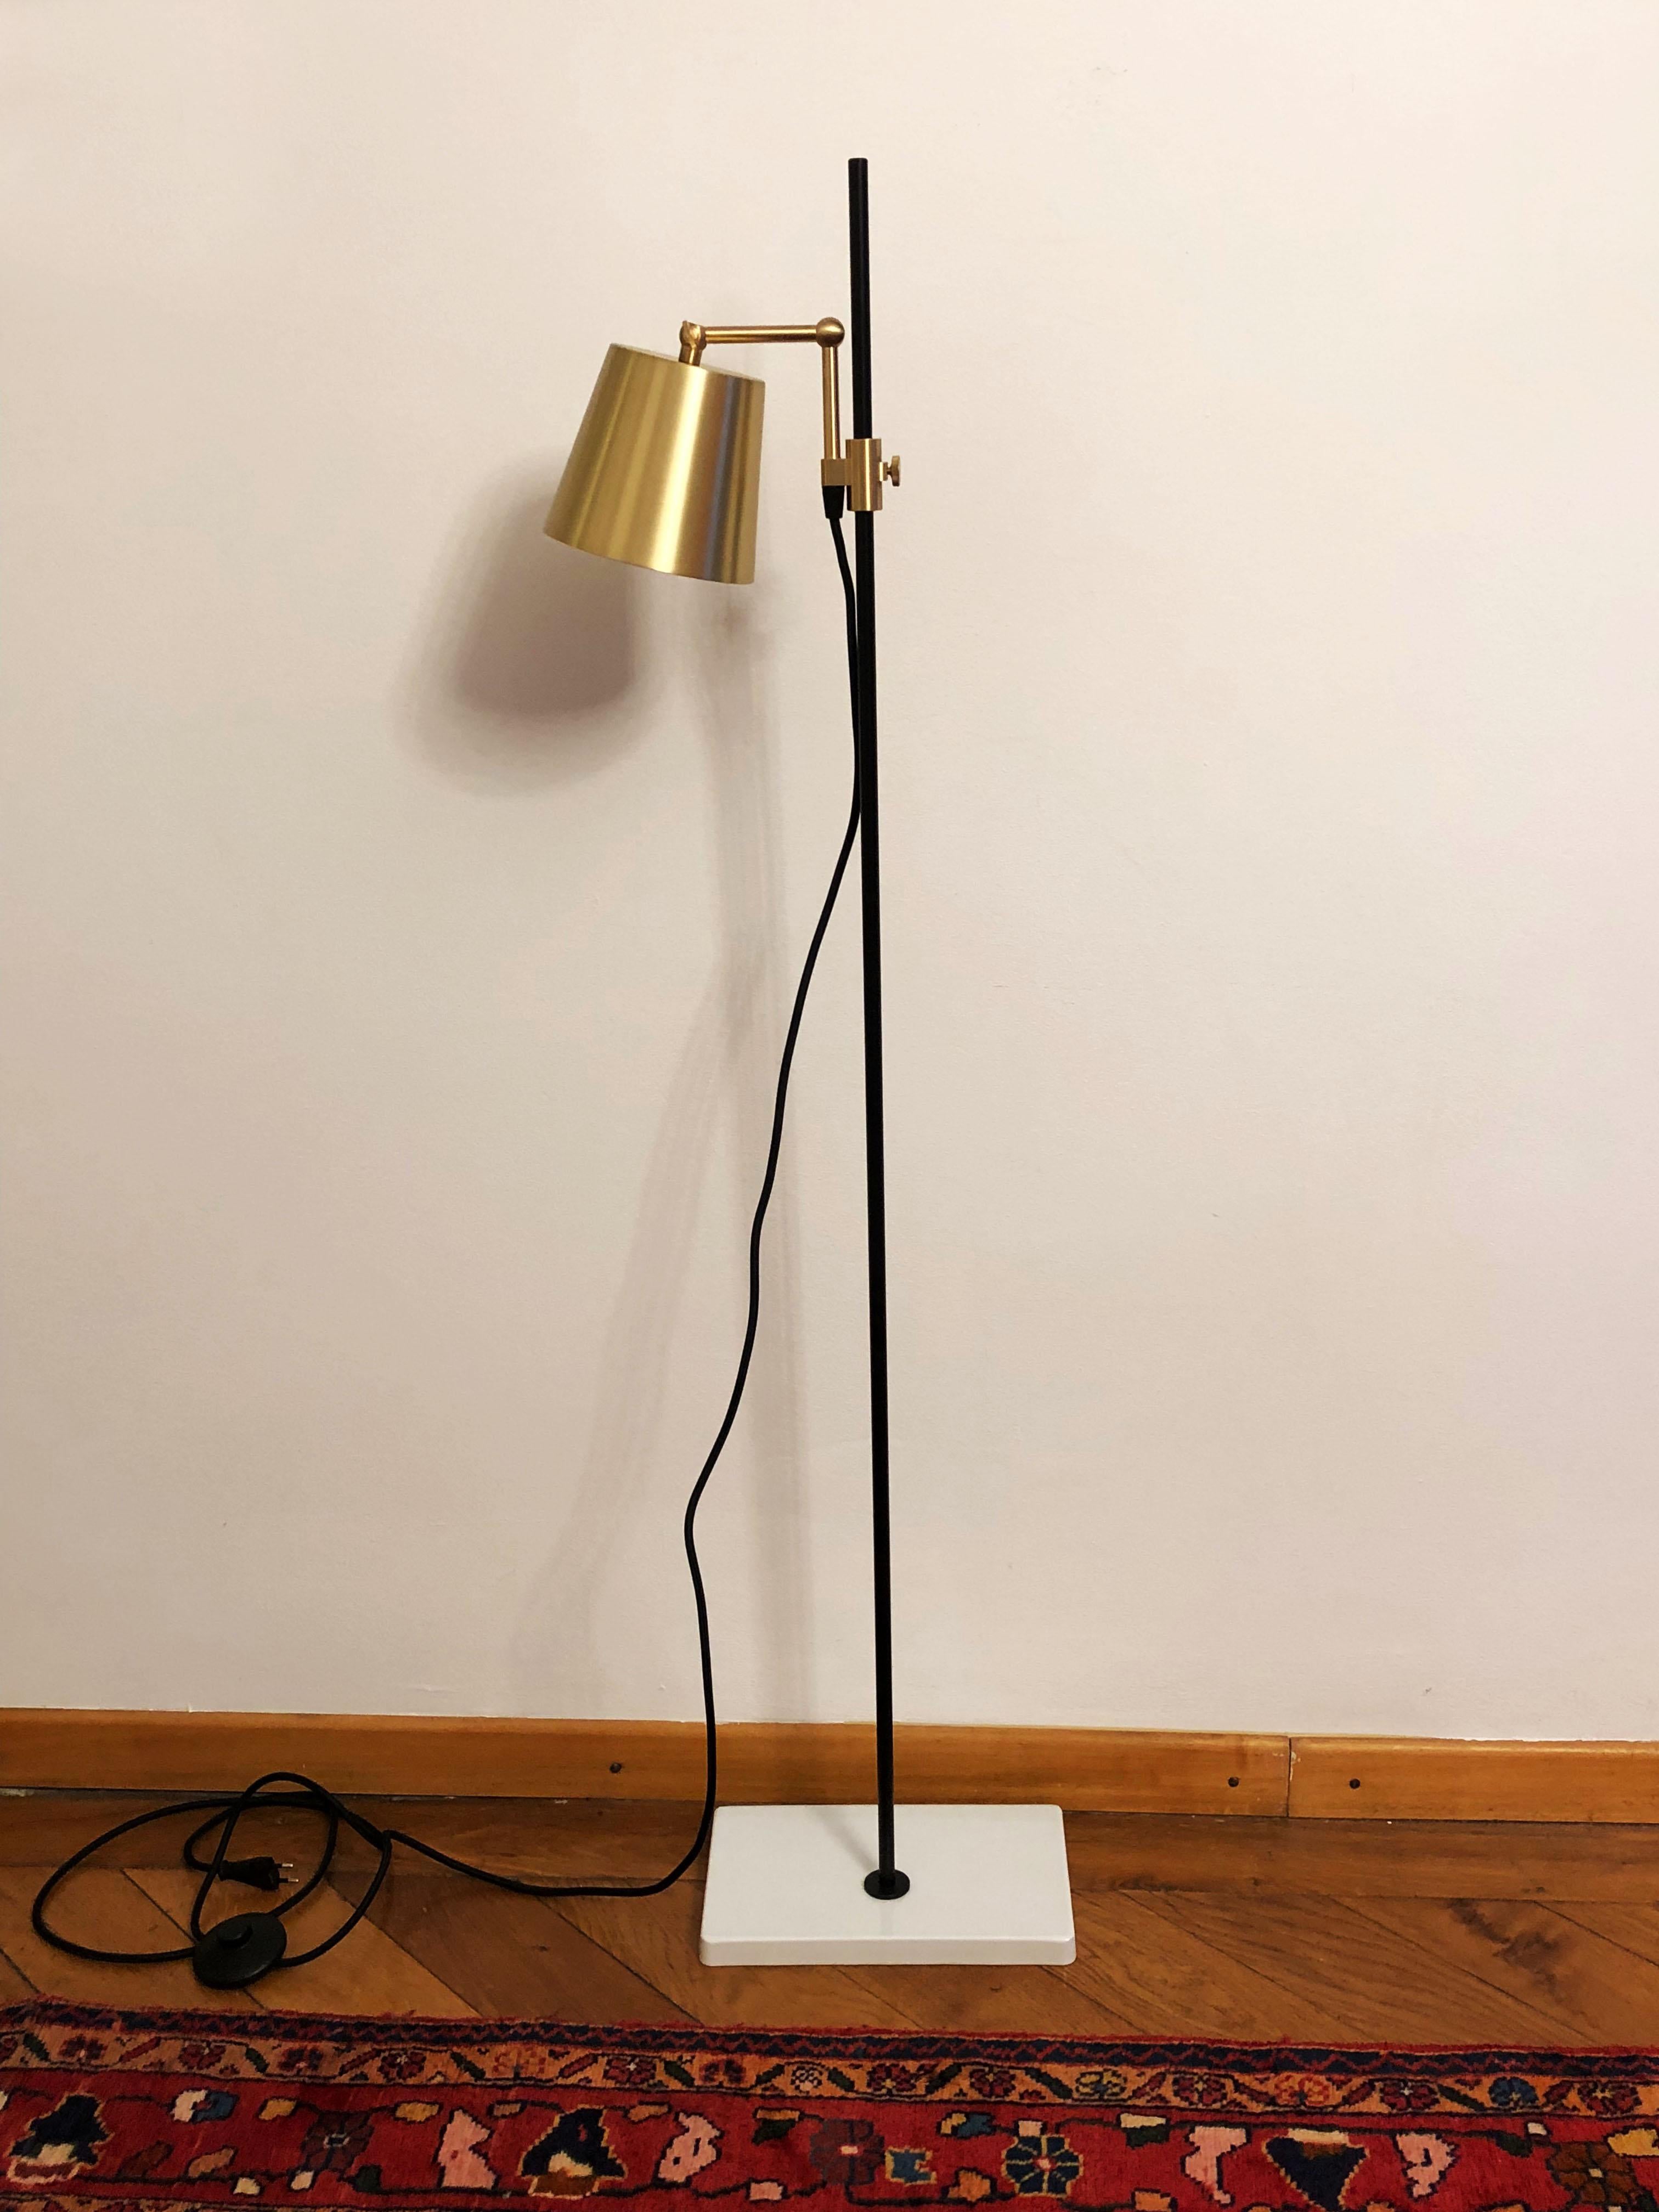 Porcelain base with steel stem and brass aluminum shade. Designed in 2009 by Andrea Kleinloog from Anatomy Design, the Karakter Copenhagen lab floor lamp was inspired by the designer’s parents’ pharmaceutical work and old lab equipment, giving the